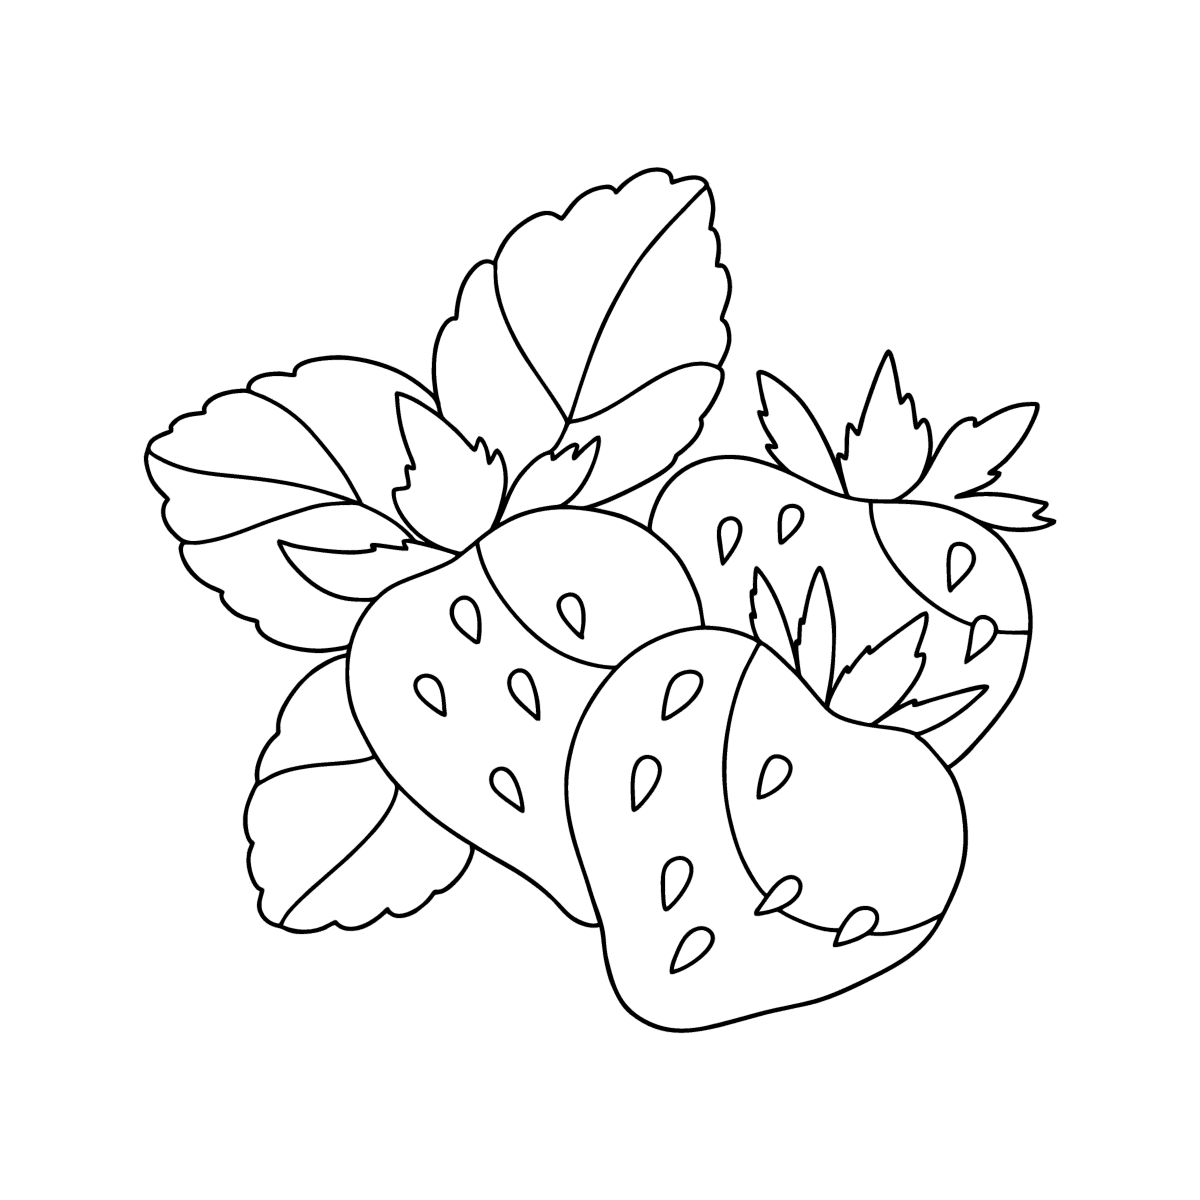 Strawberry Coloring pages - Download, Print, and Color Online!